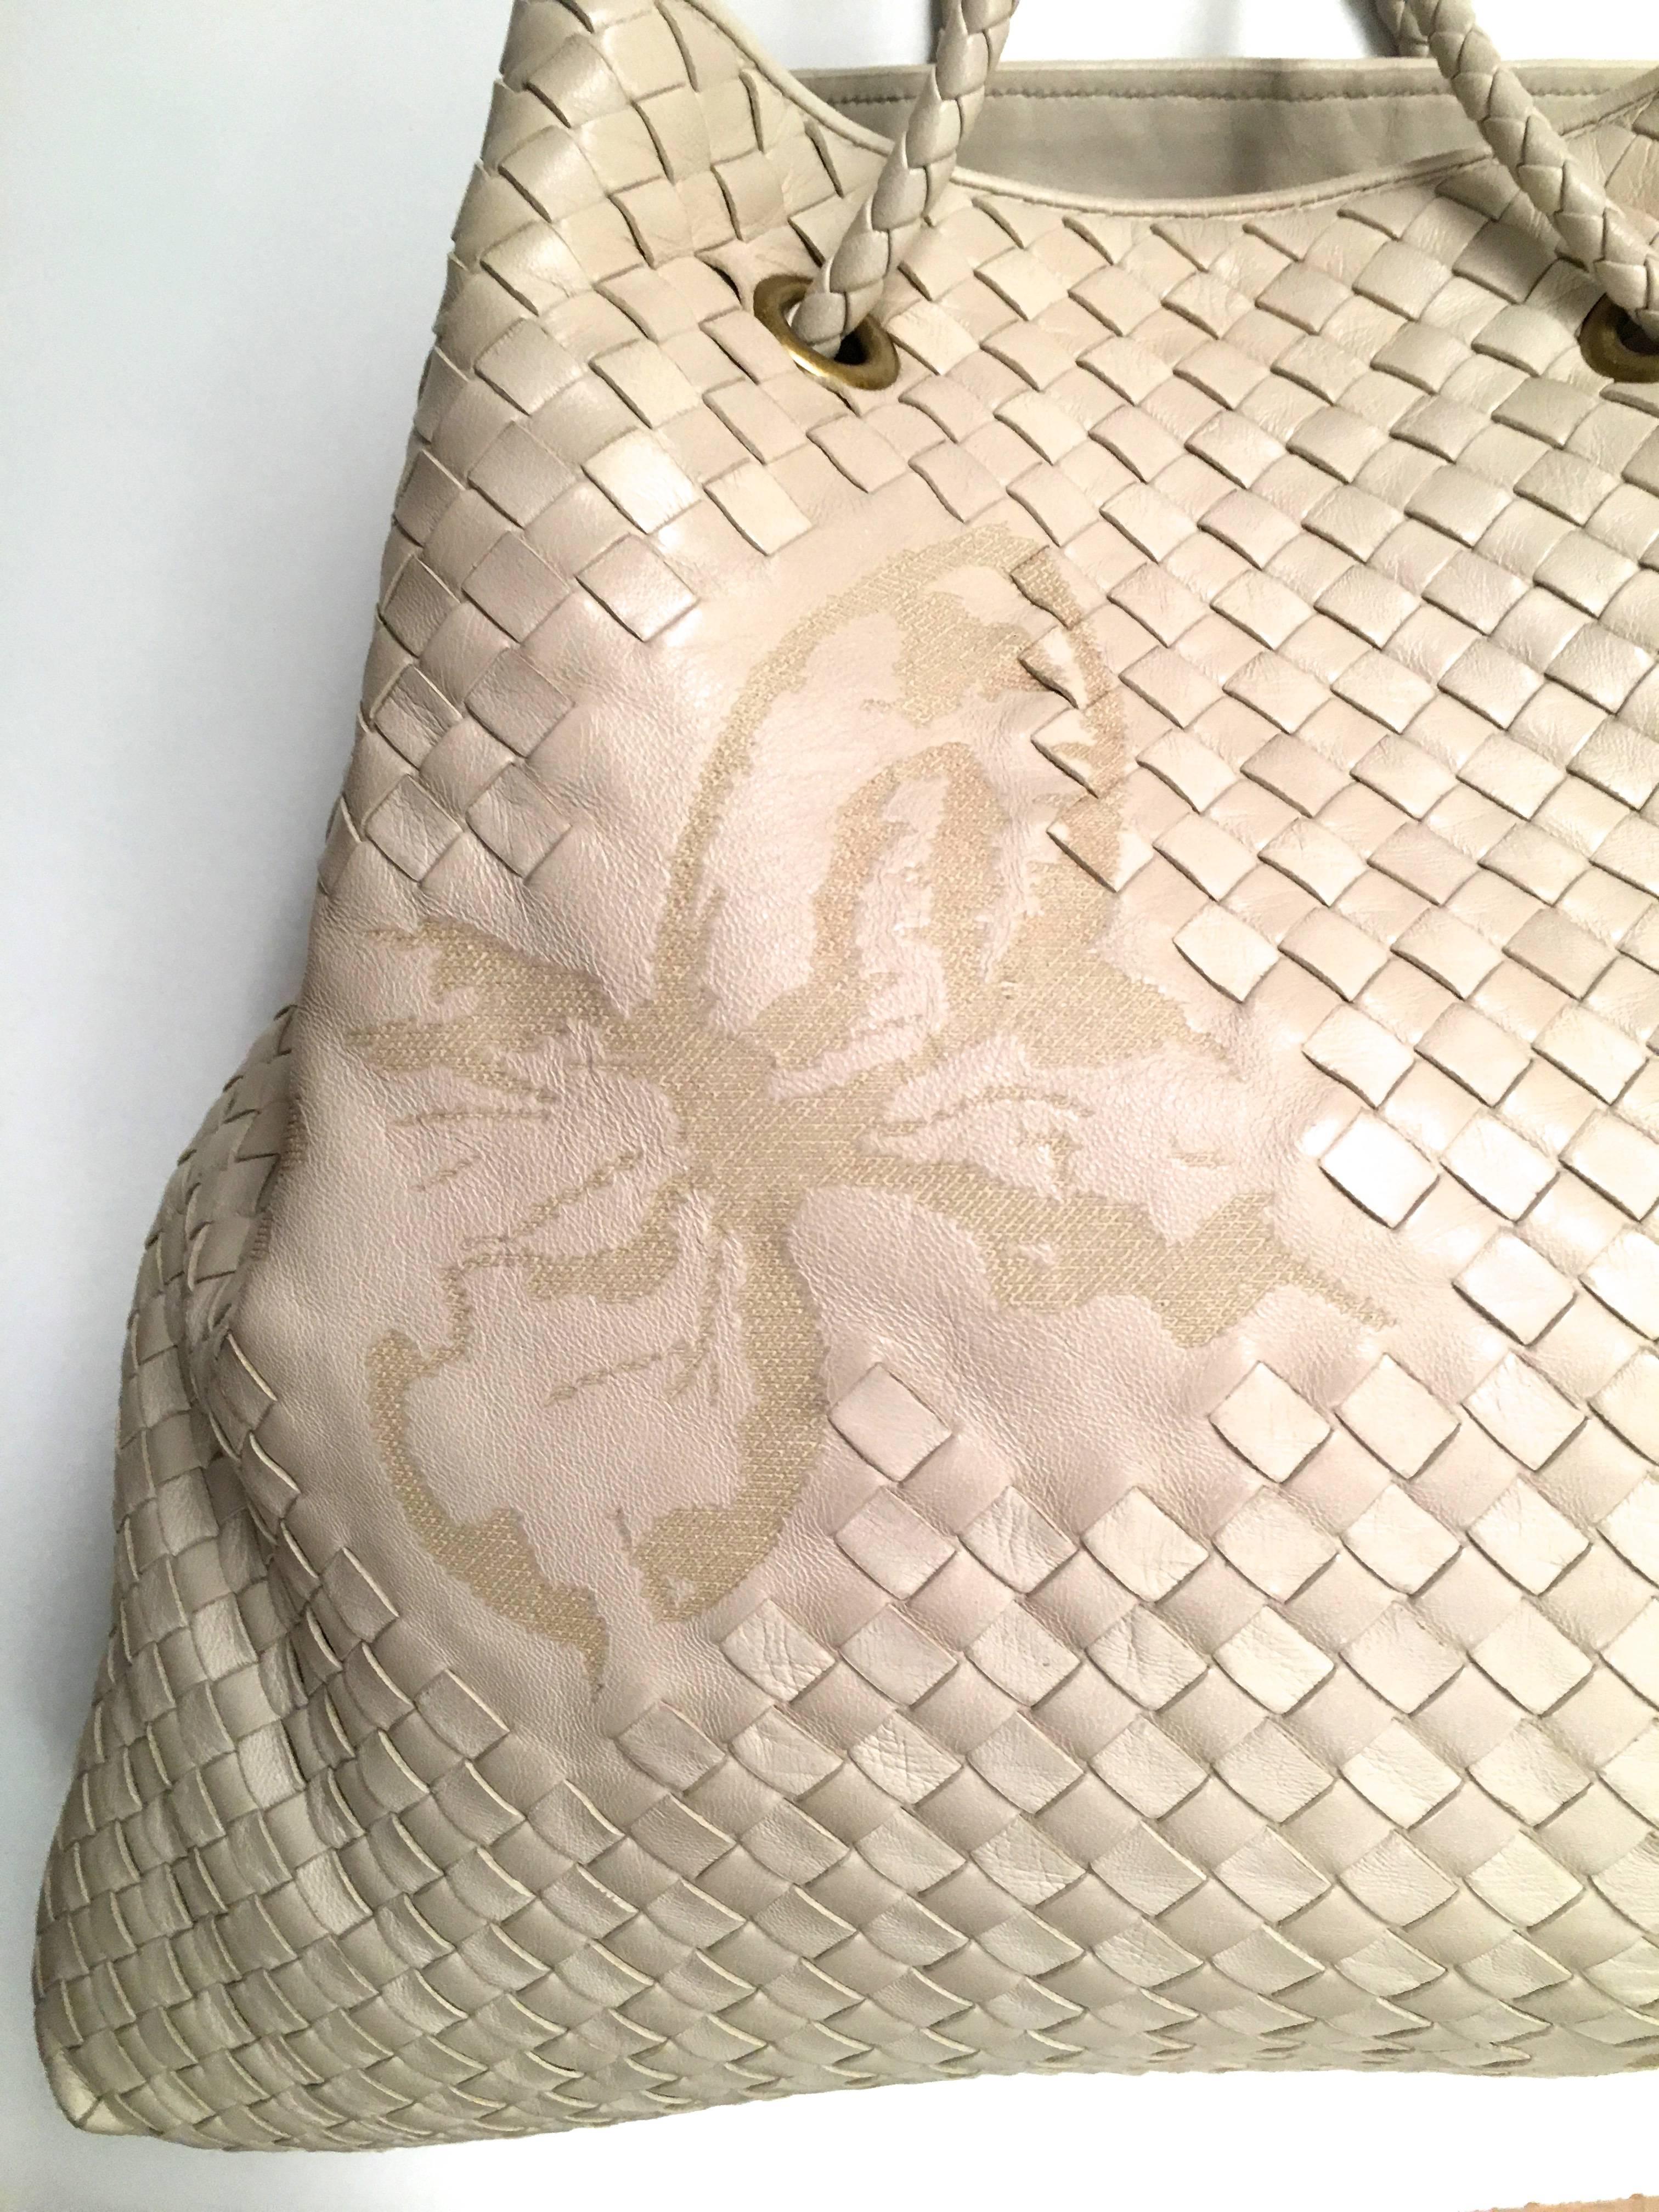 Presented here is a beautiful bag from Bottega Veneta. This rare limited release purse from the Bottega Veneta fashion house is comprised of a creamy beige white leather with decorative butterflies that have been fashioned into the leather. There